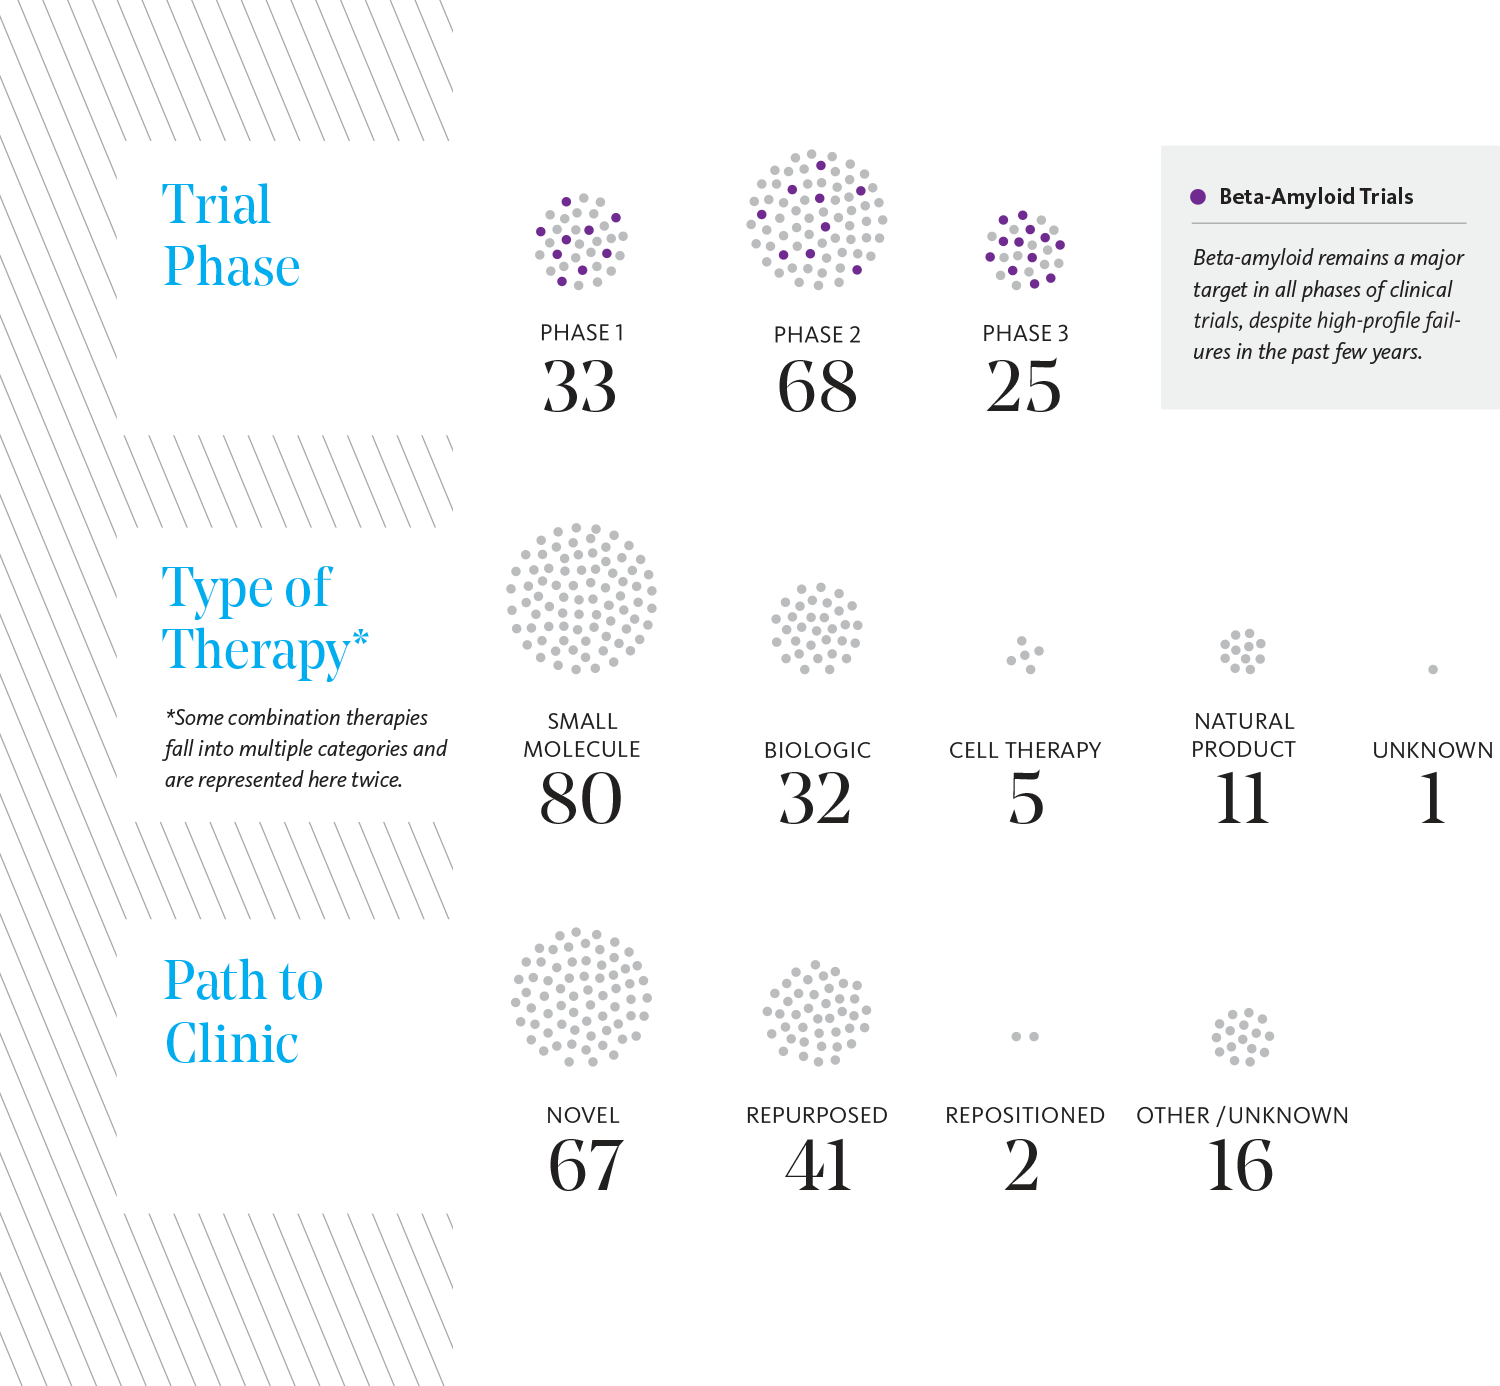 Trial Phases, Types of Therapy, Paths to Clinic